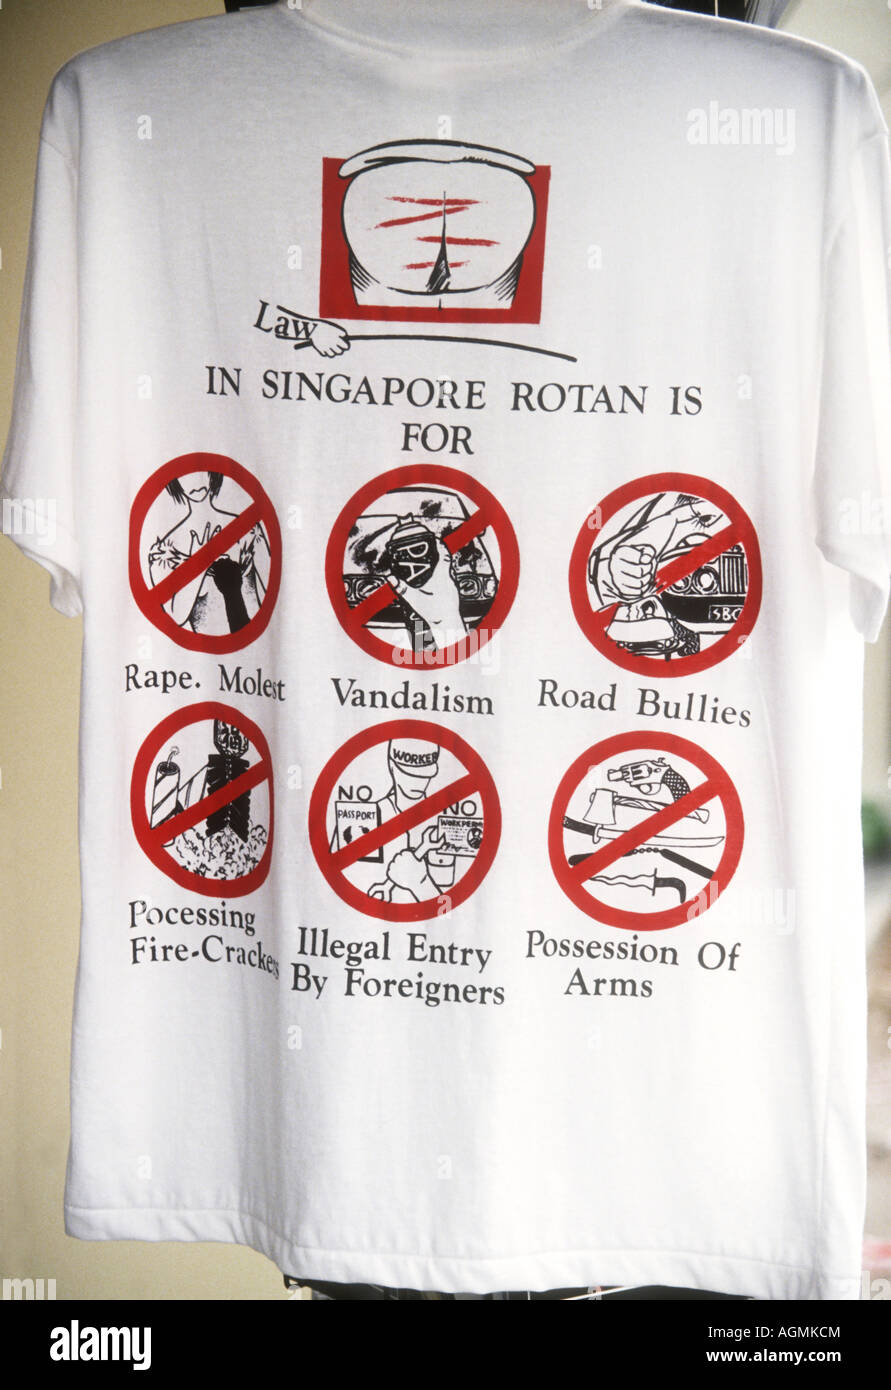 popular teeshirt documents Singapore's draconian laws and punishments Stock Photo